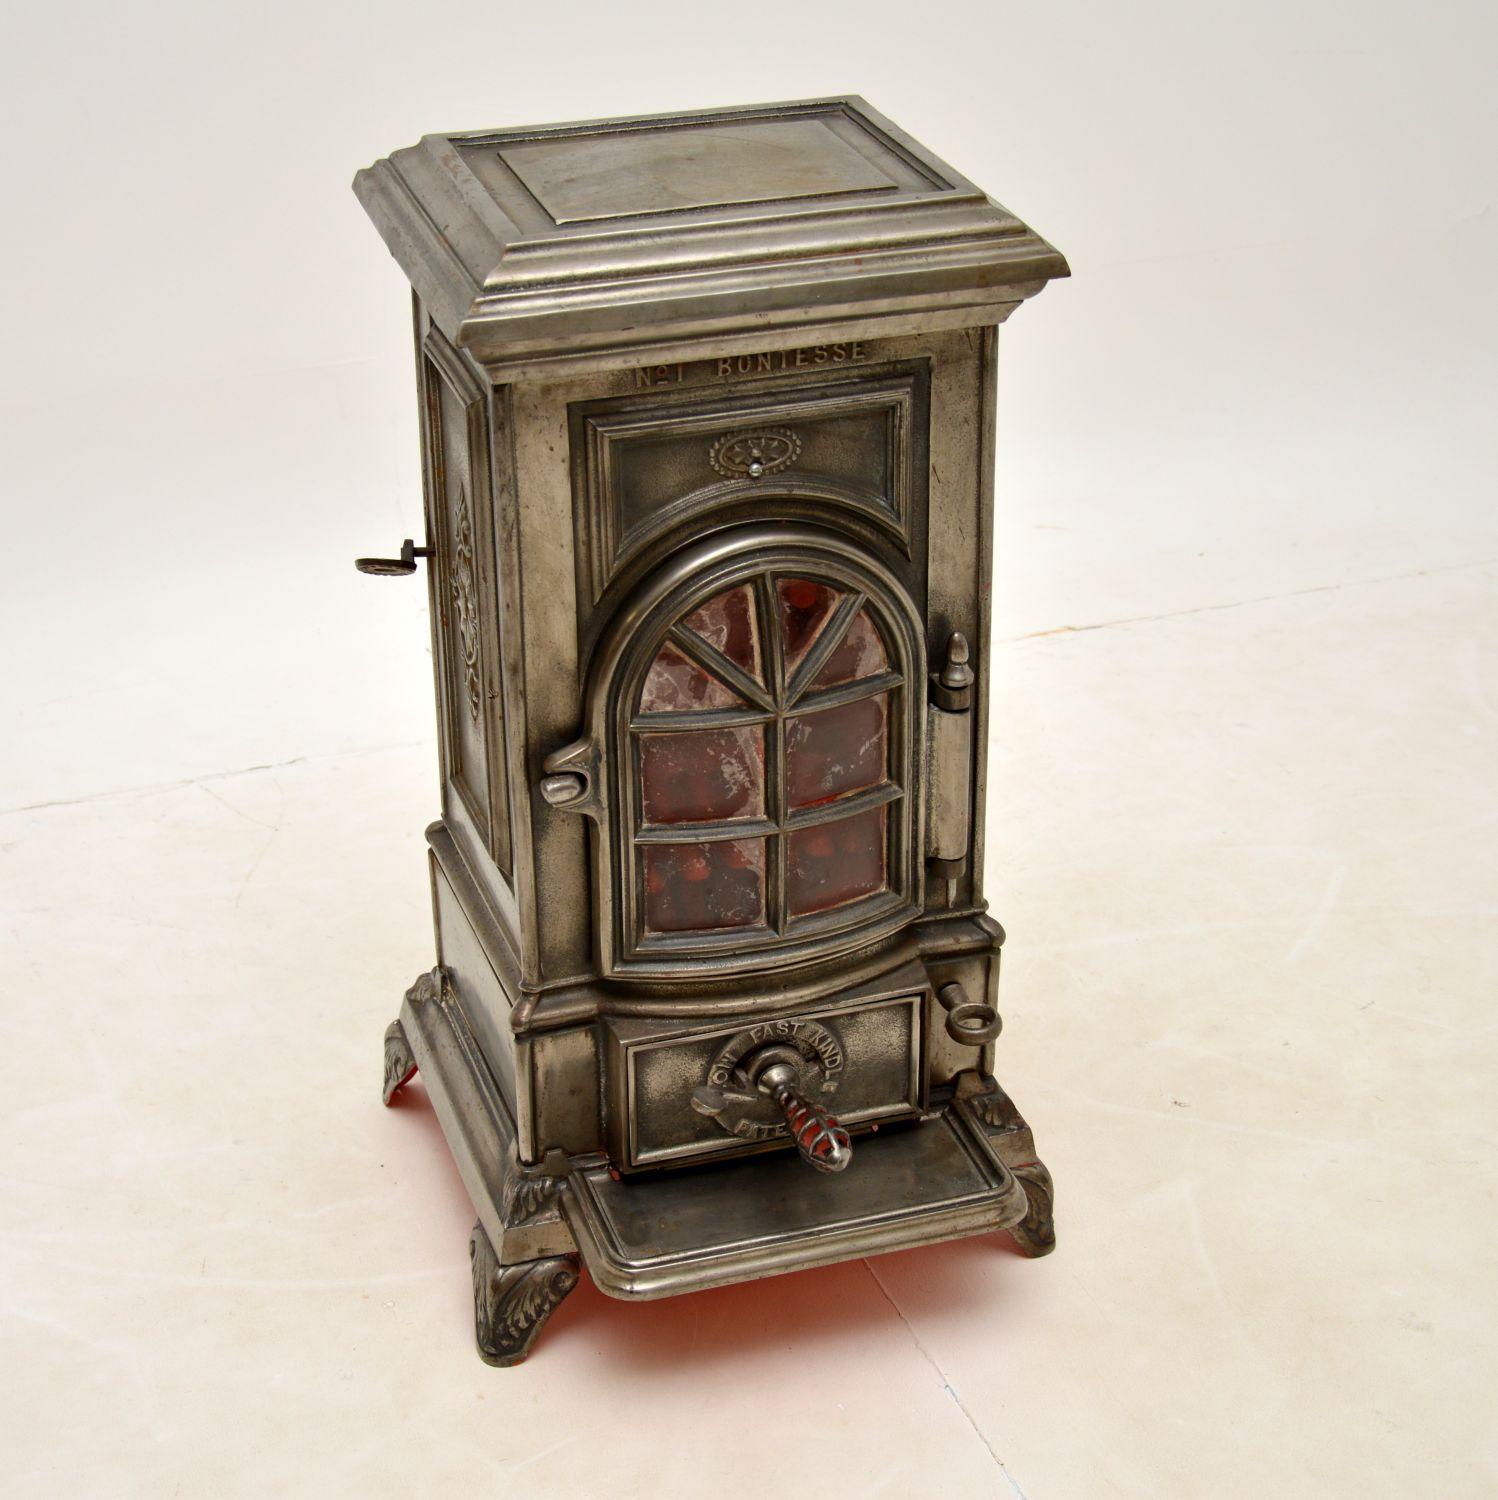 A magnificent antique cast iron coal burner stove, this is the Model 1 by Bontesse. It was made in England and dates from around 1890-1910.

Bontesse was the forerunner to Artesse, Francesse and the company now known as Esse, which still make high